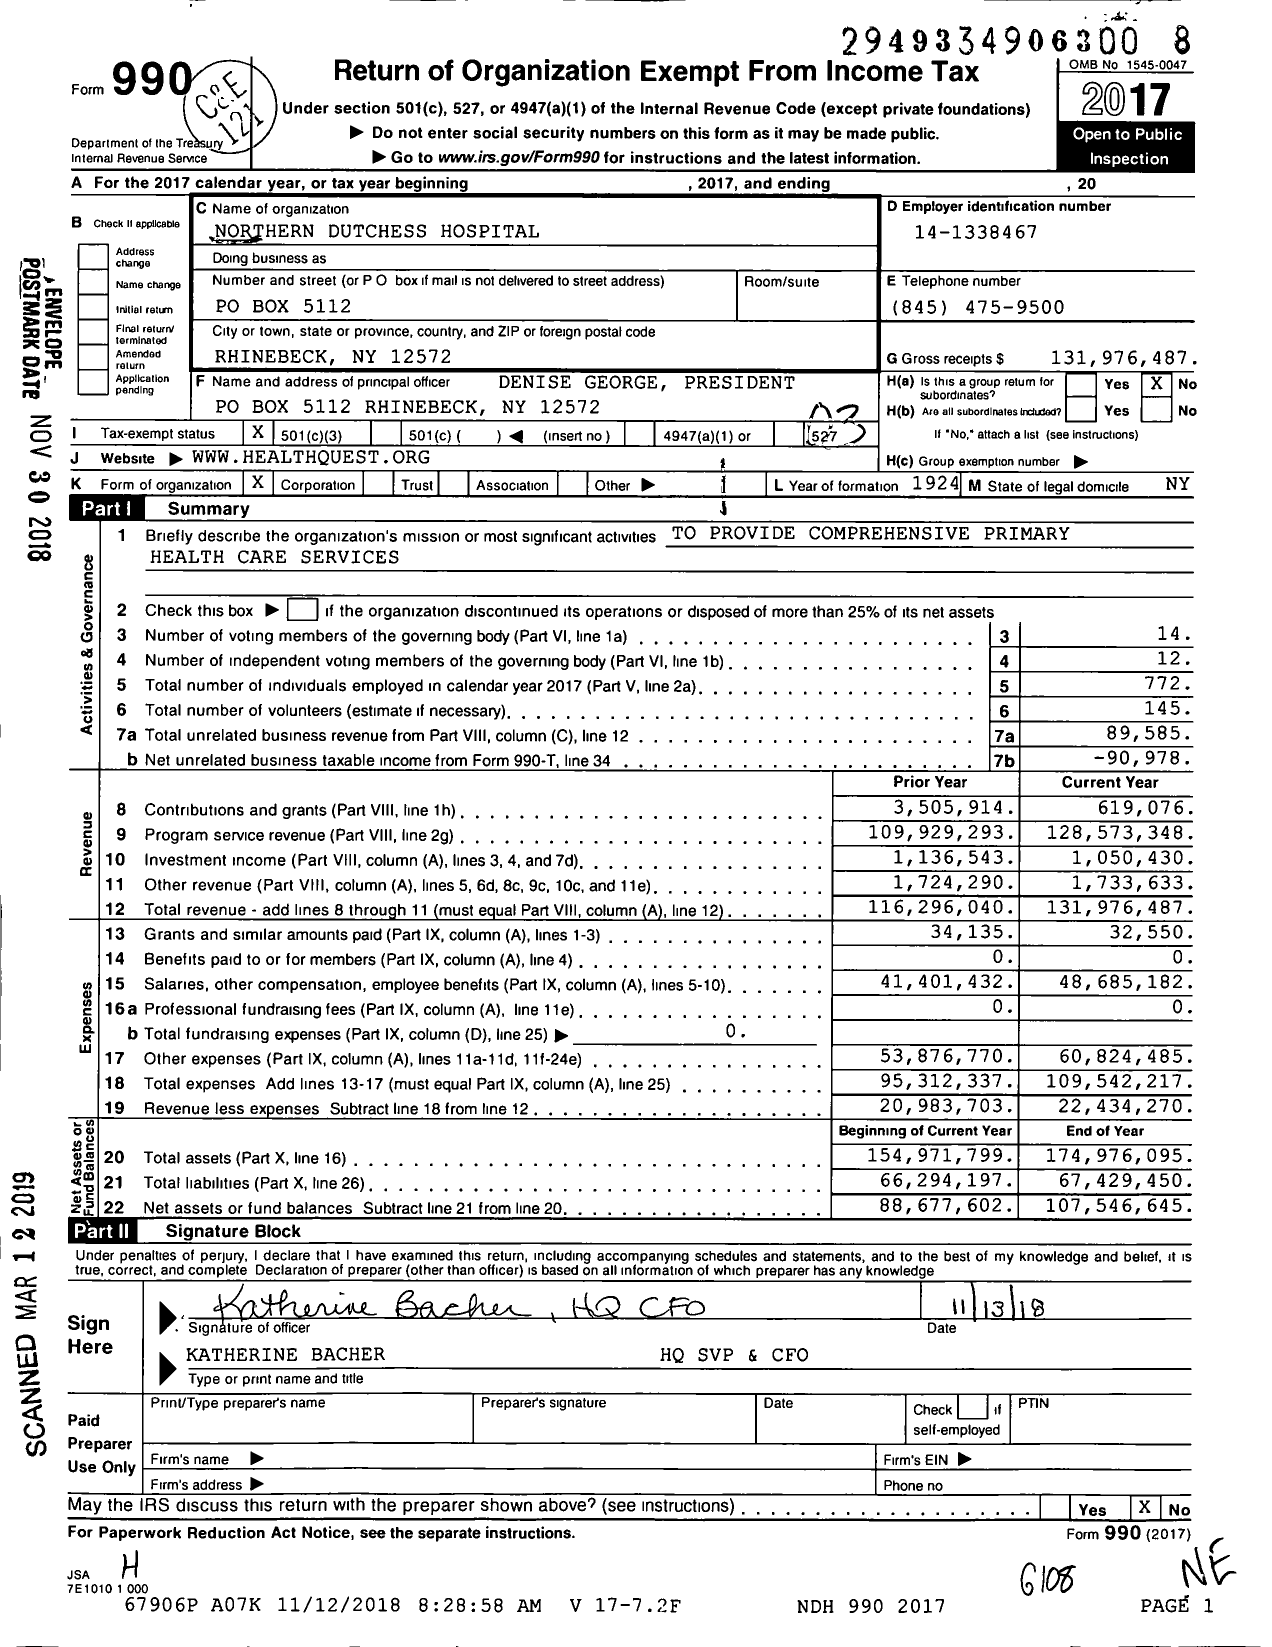 Image of first page of 2017 Form 990 for Northern Dutchess Hospital (NDH)